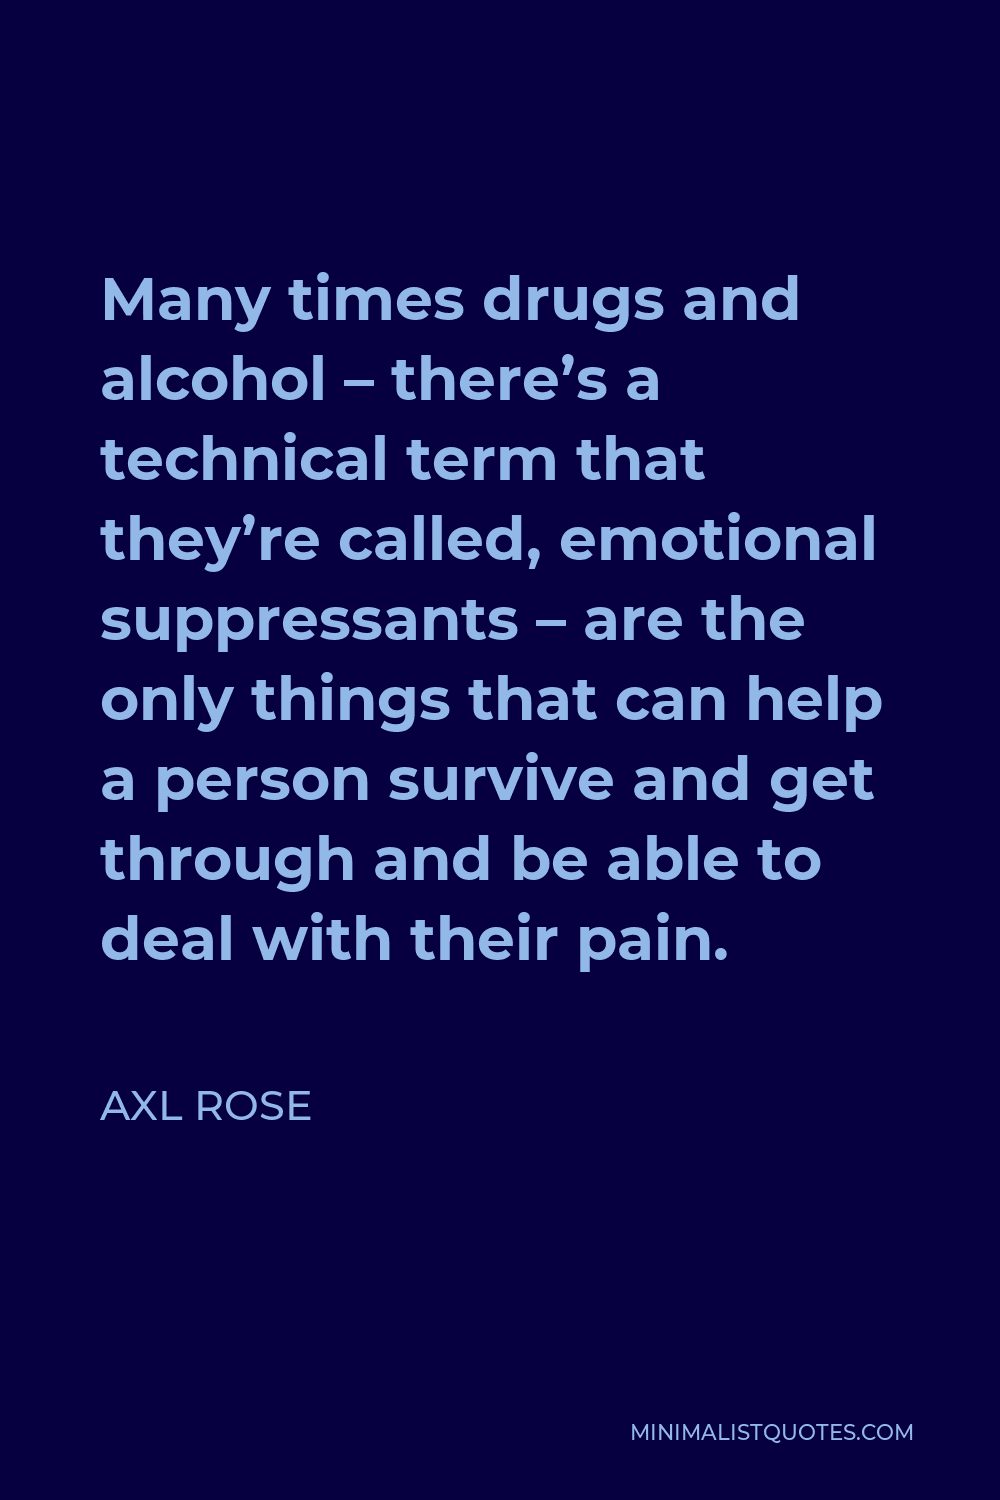 Axl Rose Quote - Many times drugs and alcohol – there’s a technical term that they’re called, emotional suppressants – are the only things that can help a person survive and get through and be able to deal with their pain.